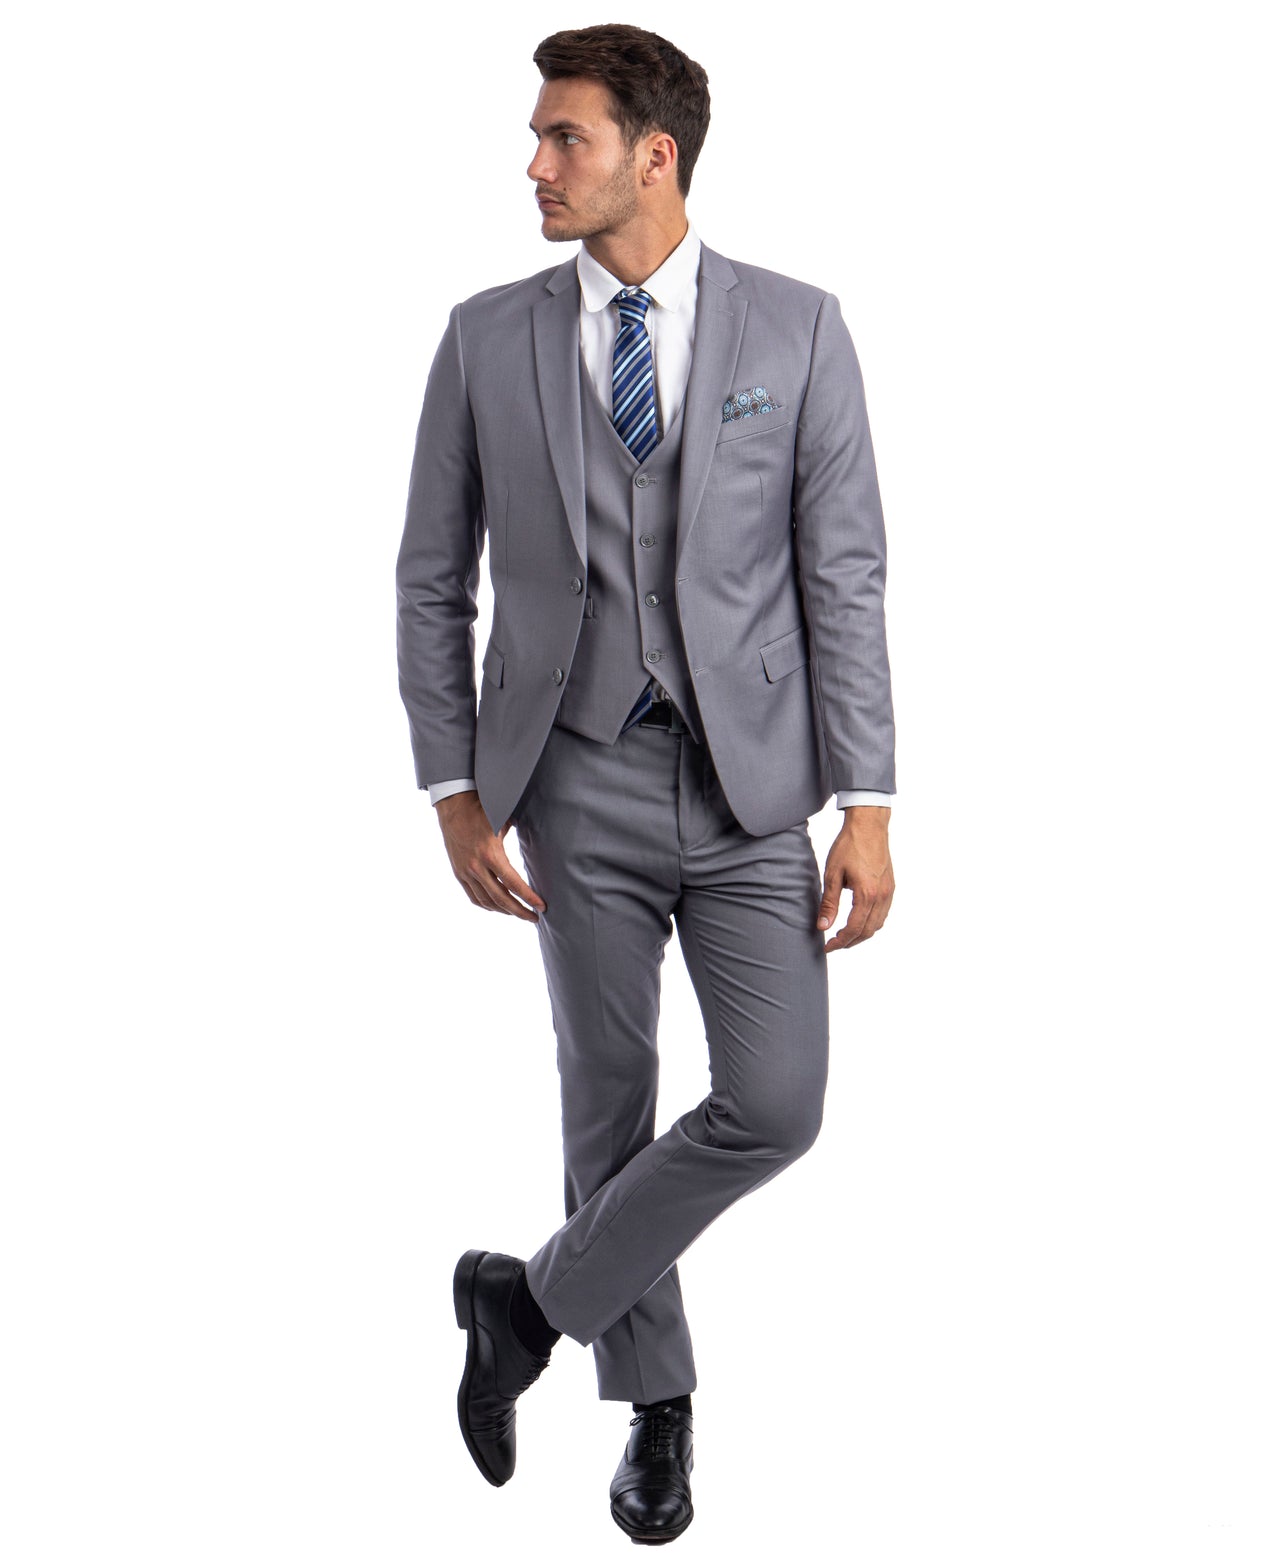 Gray Suit For Men Formal Suits For All Ocassions - Hattitude